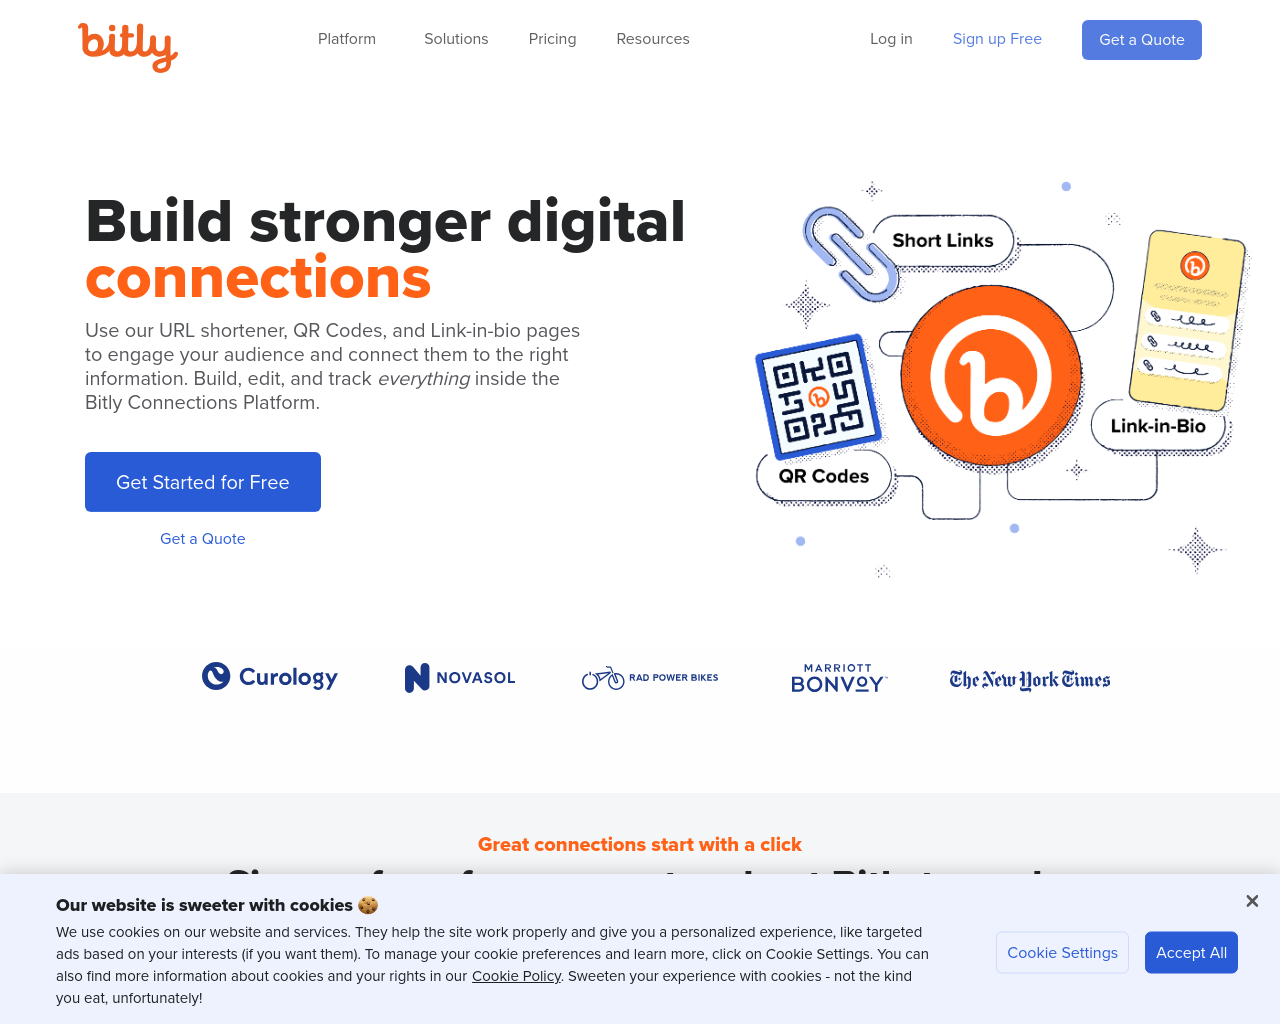 bitly.is